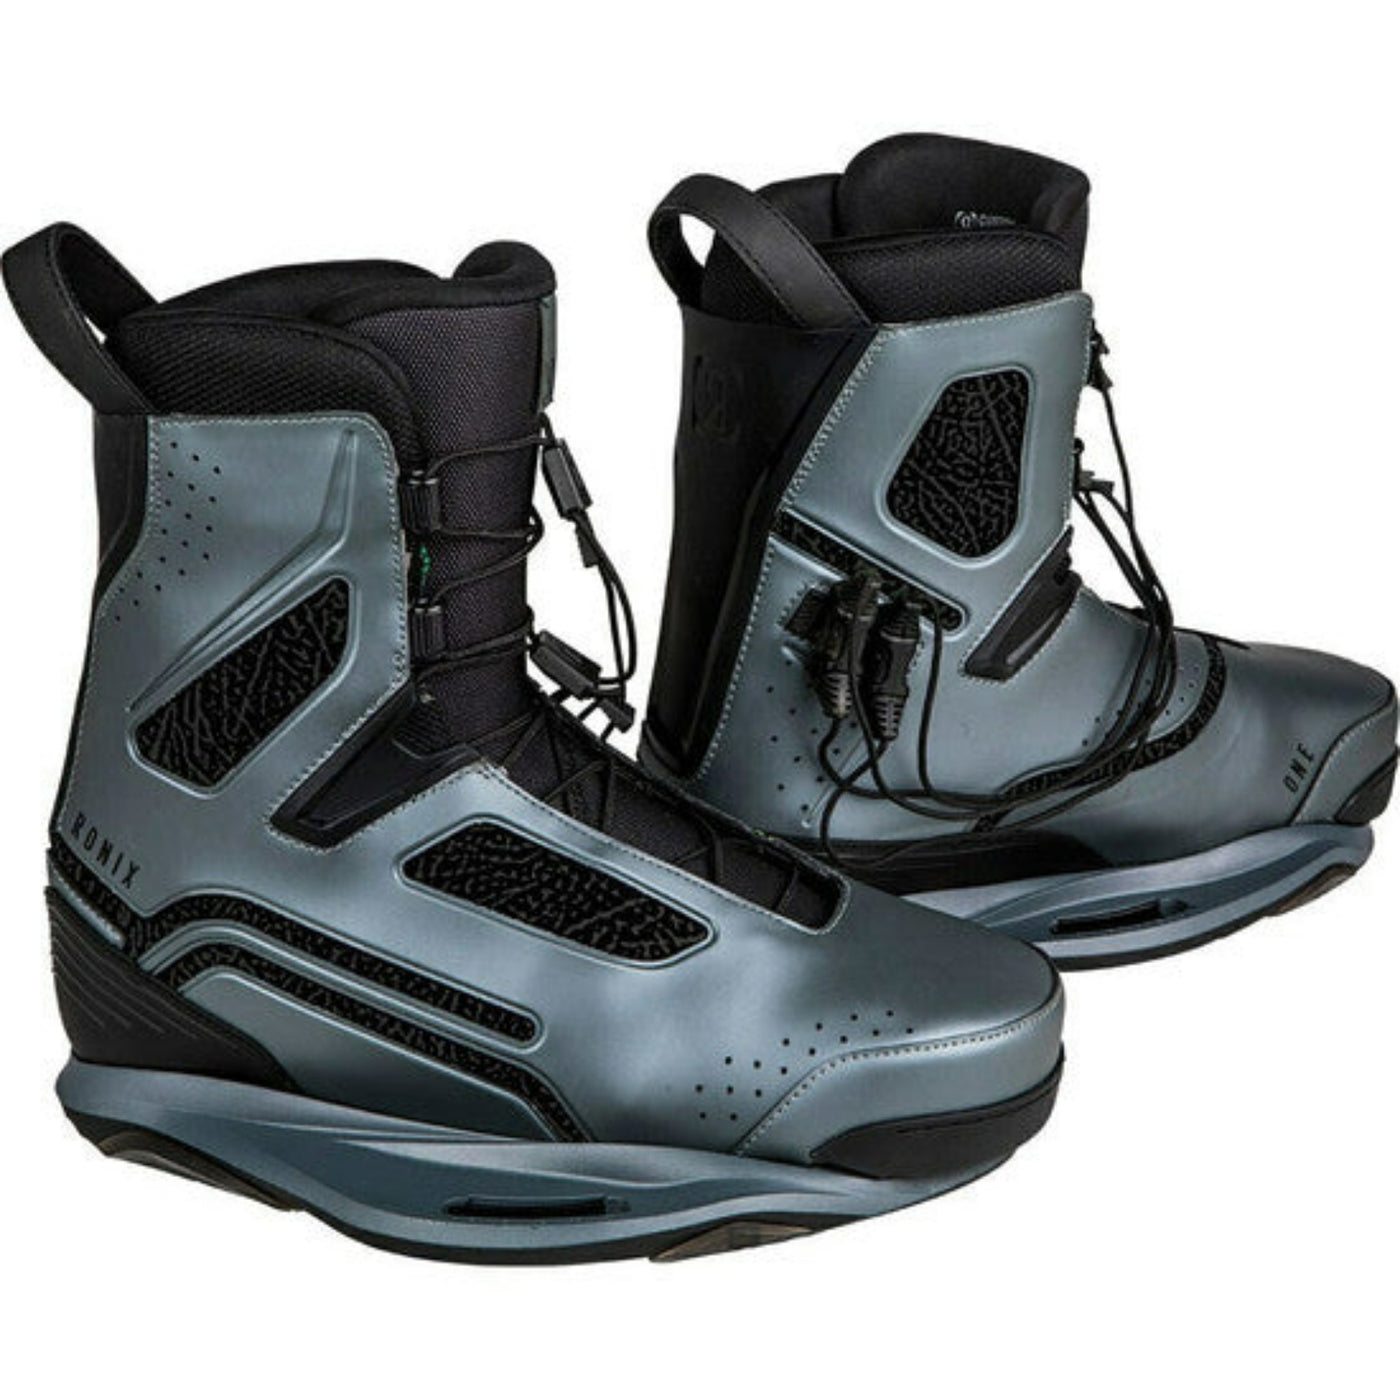 Ronix One Wakeboard Boots Space Craft Grey 2019